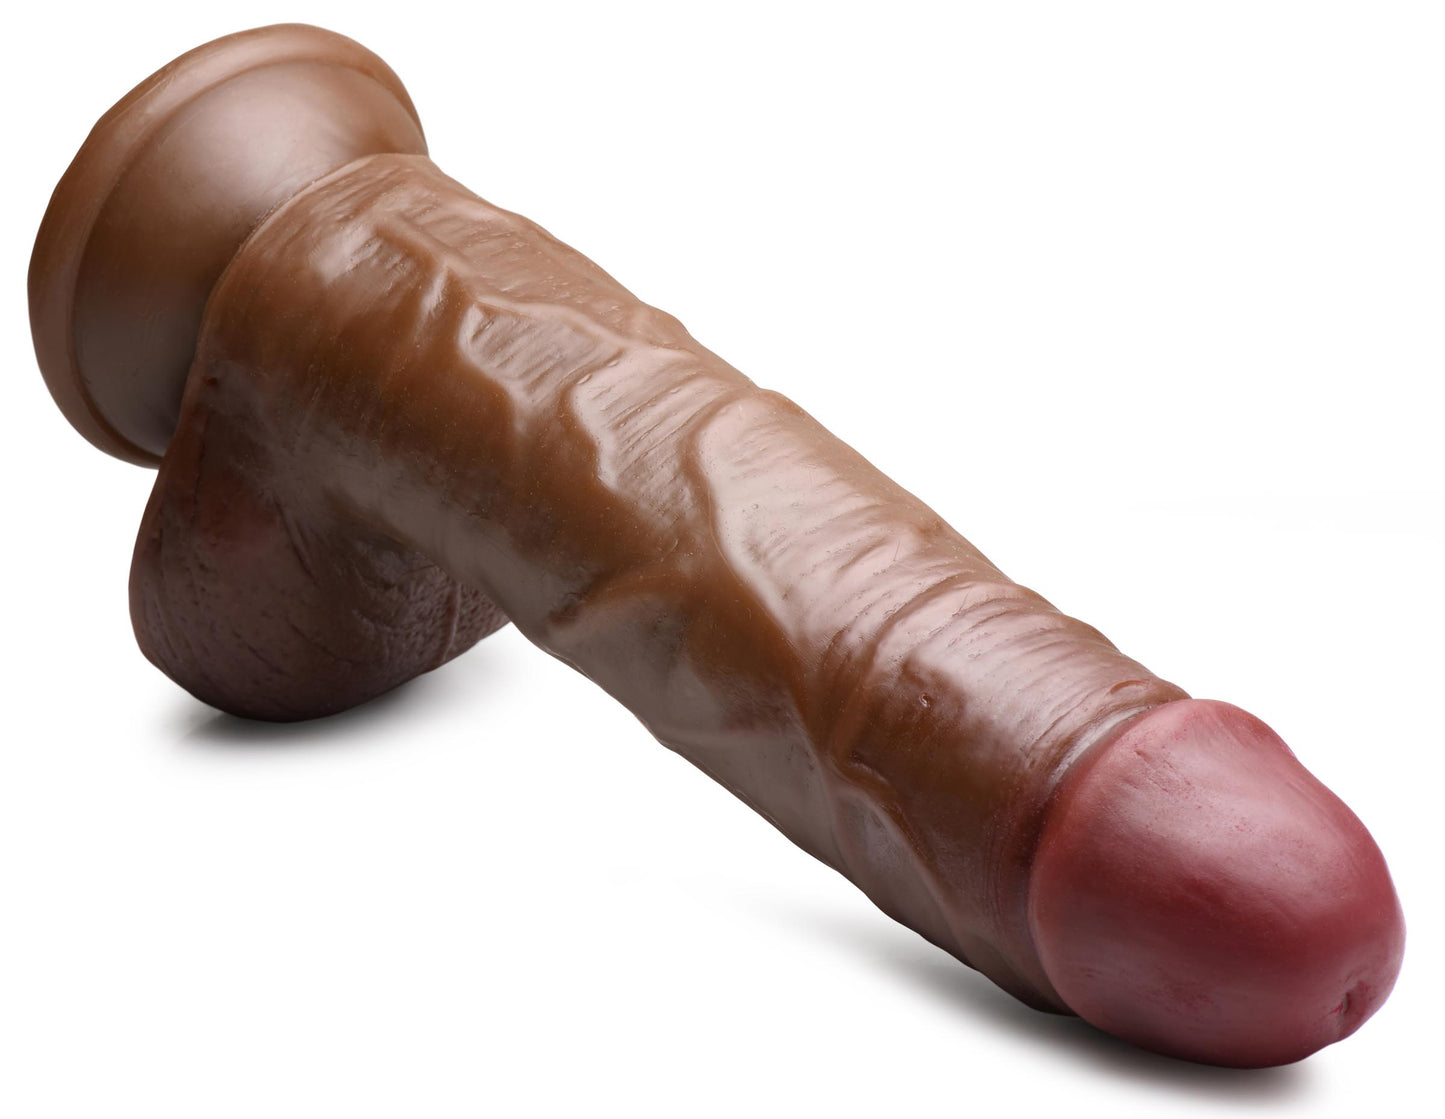 JOCK 9 Inch Dong with Balls Brown - UABDSM